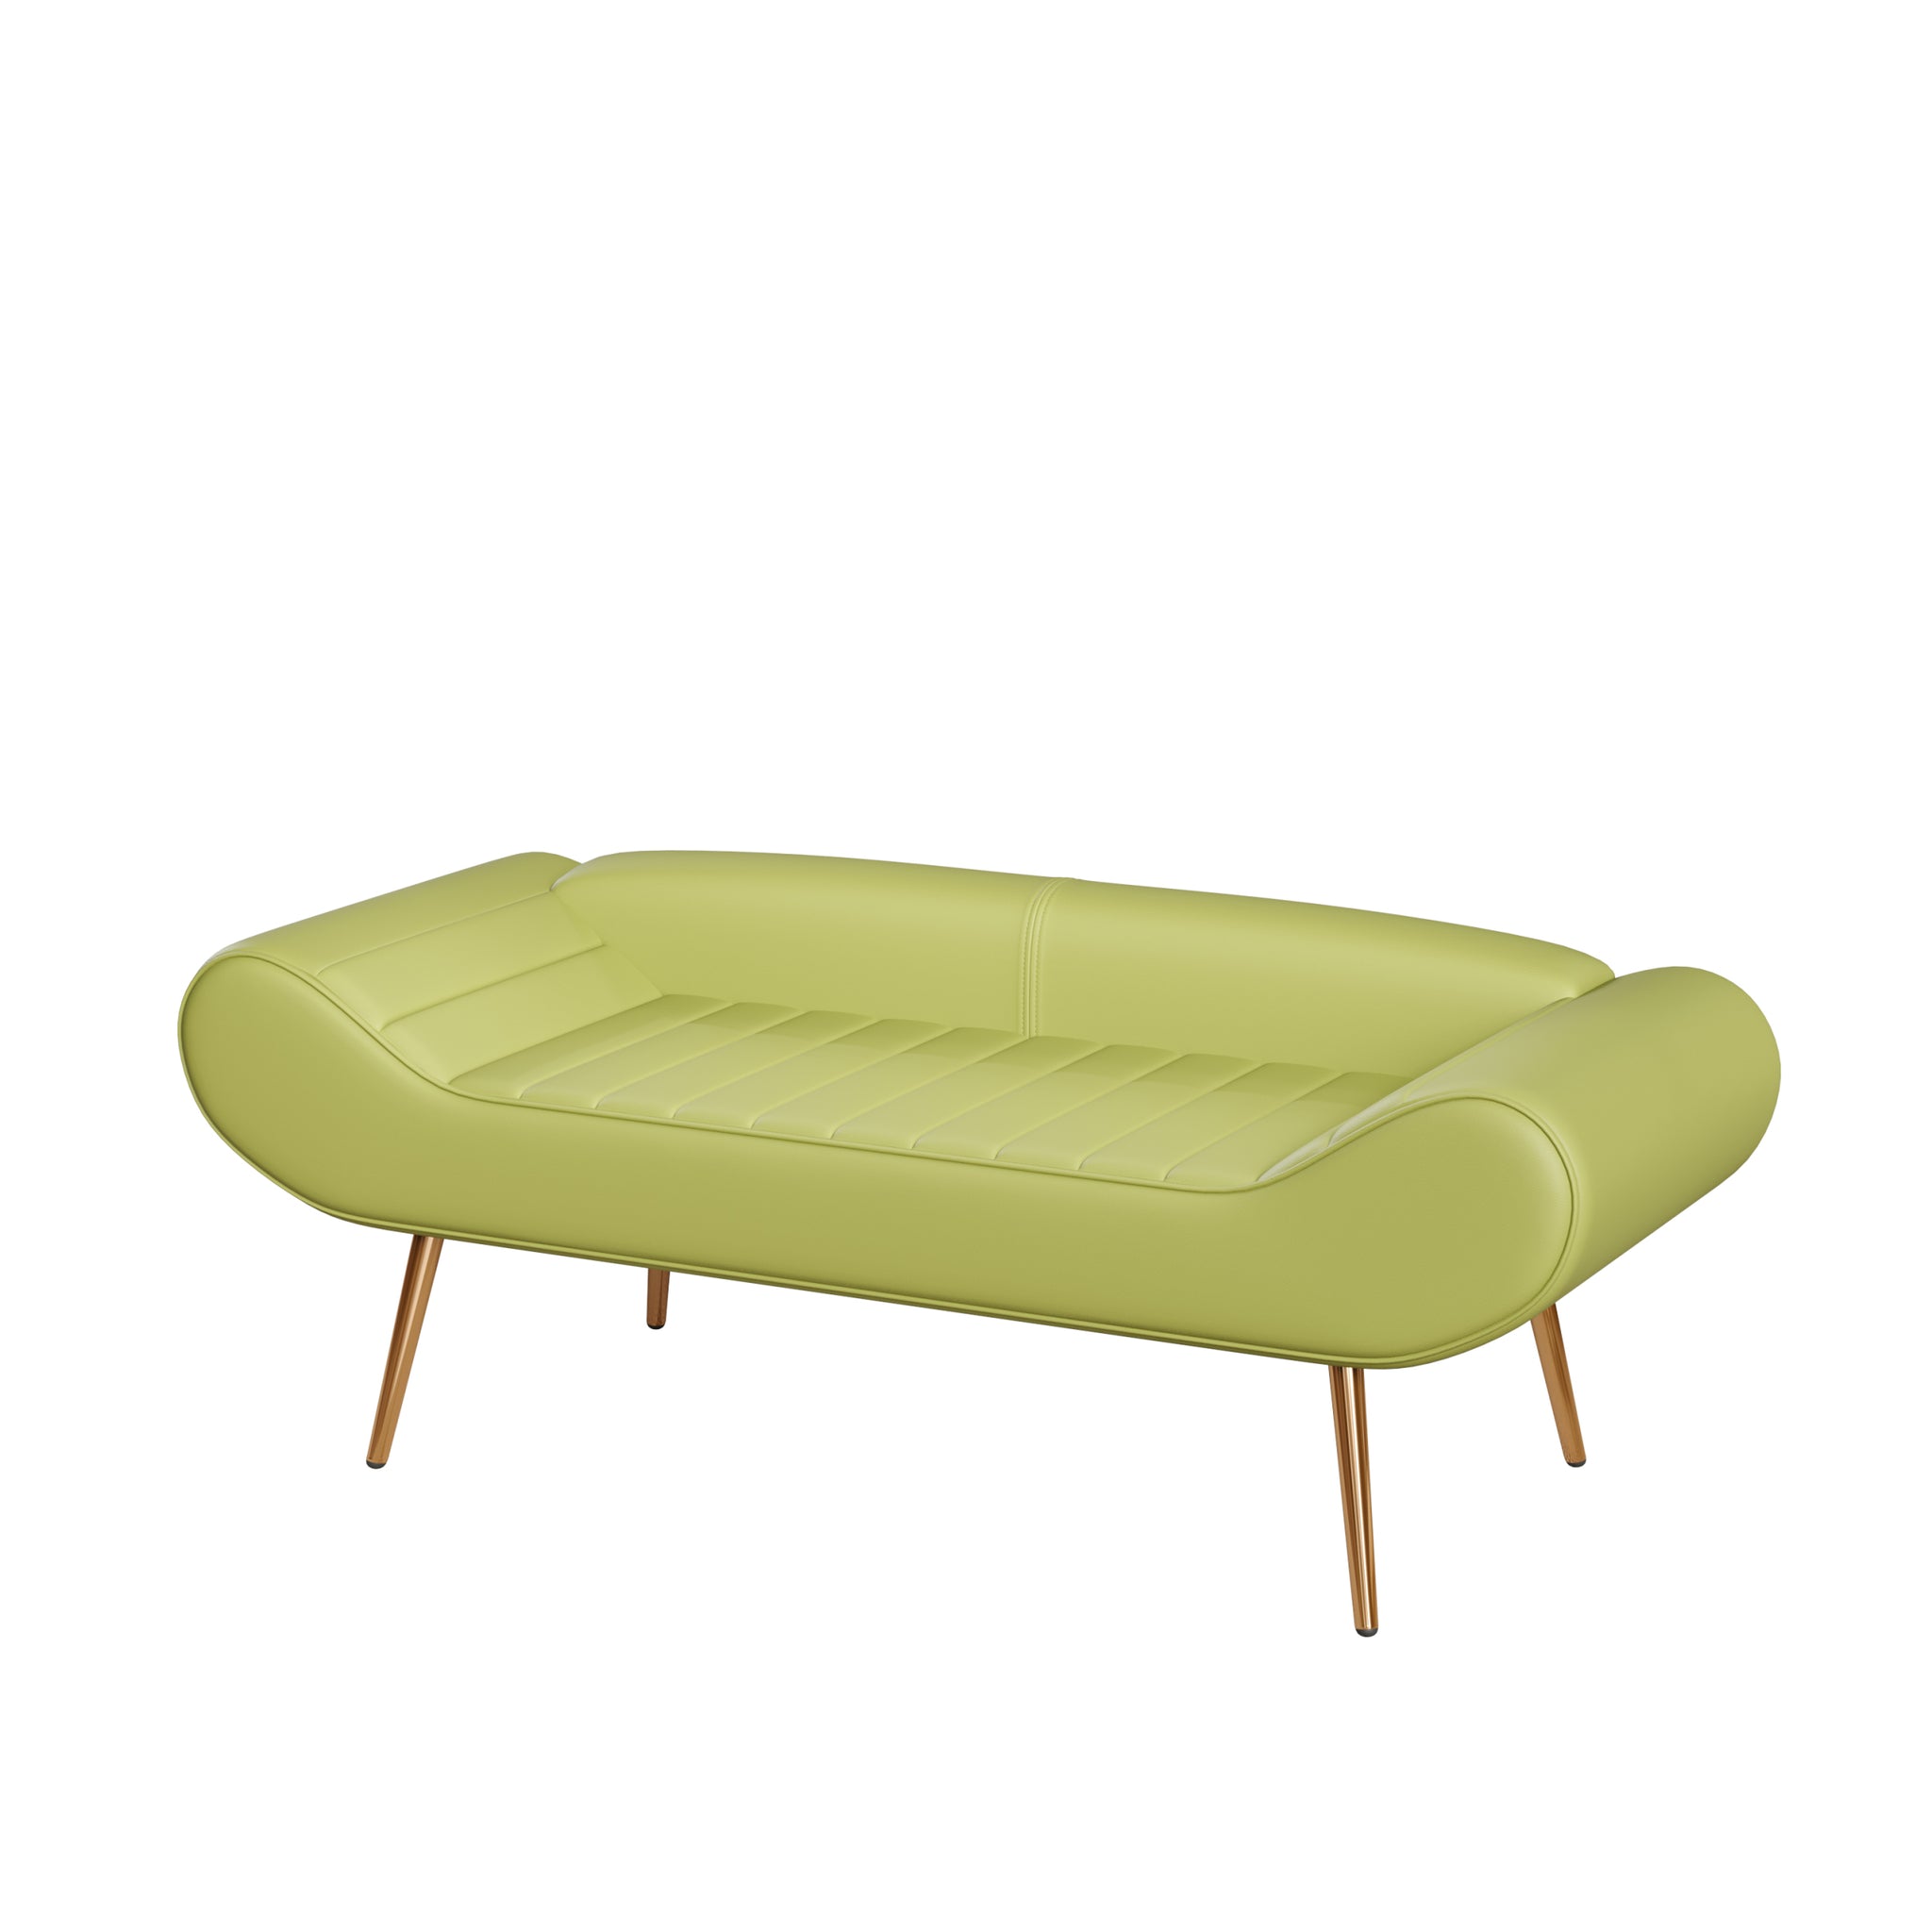 57 inch sofa stool PVC fabric can be placed in the bed green-polyester blend